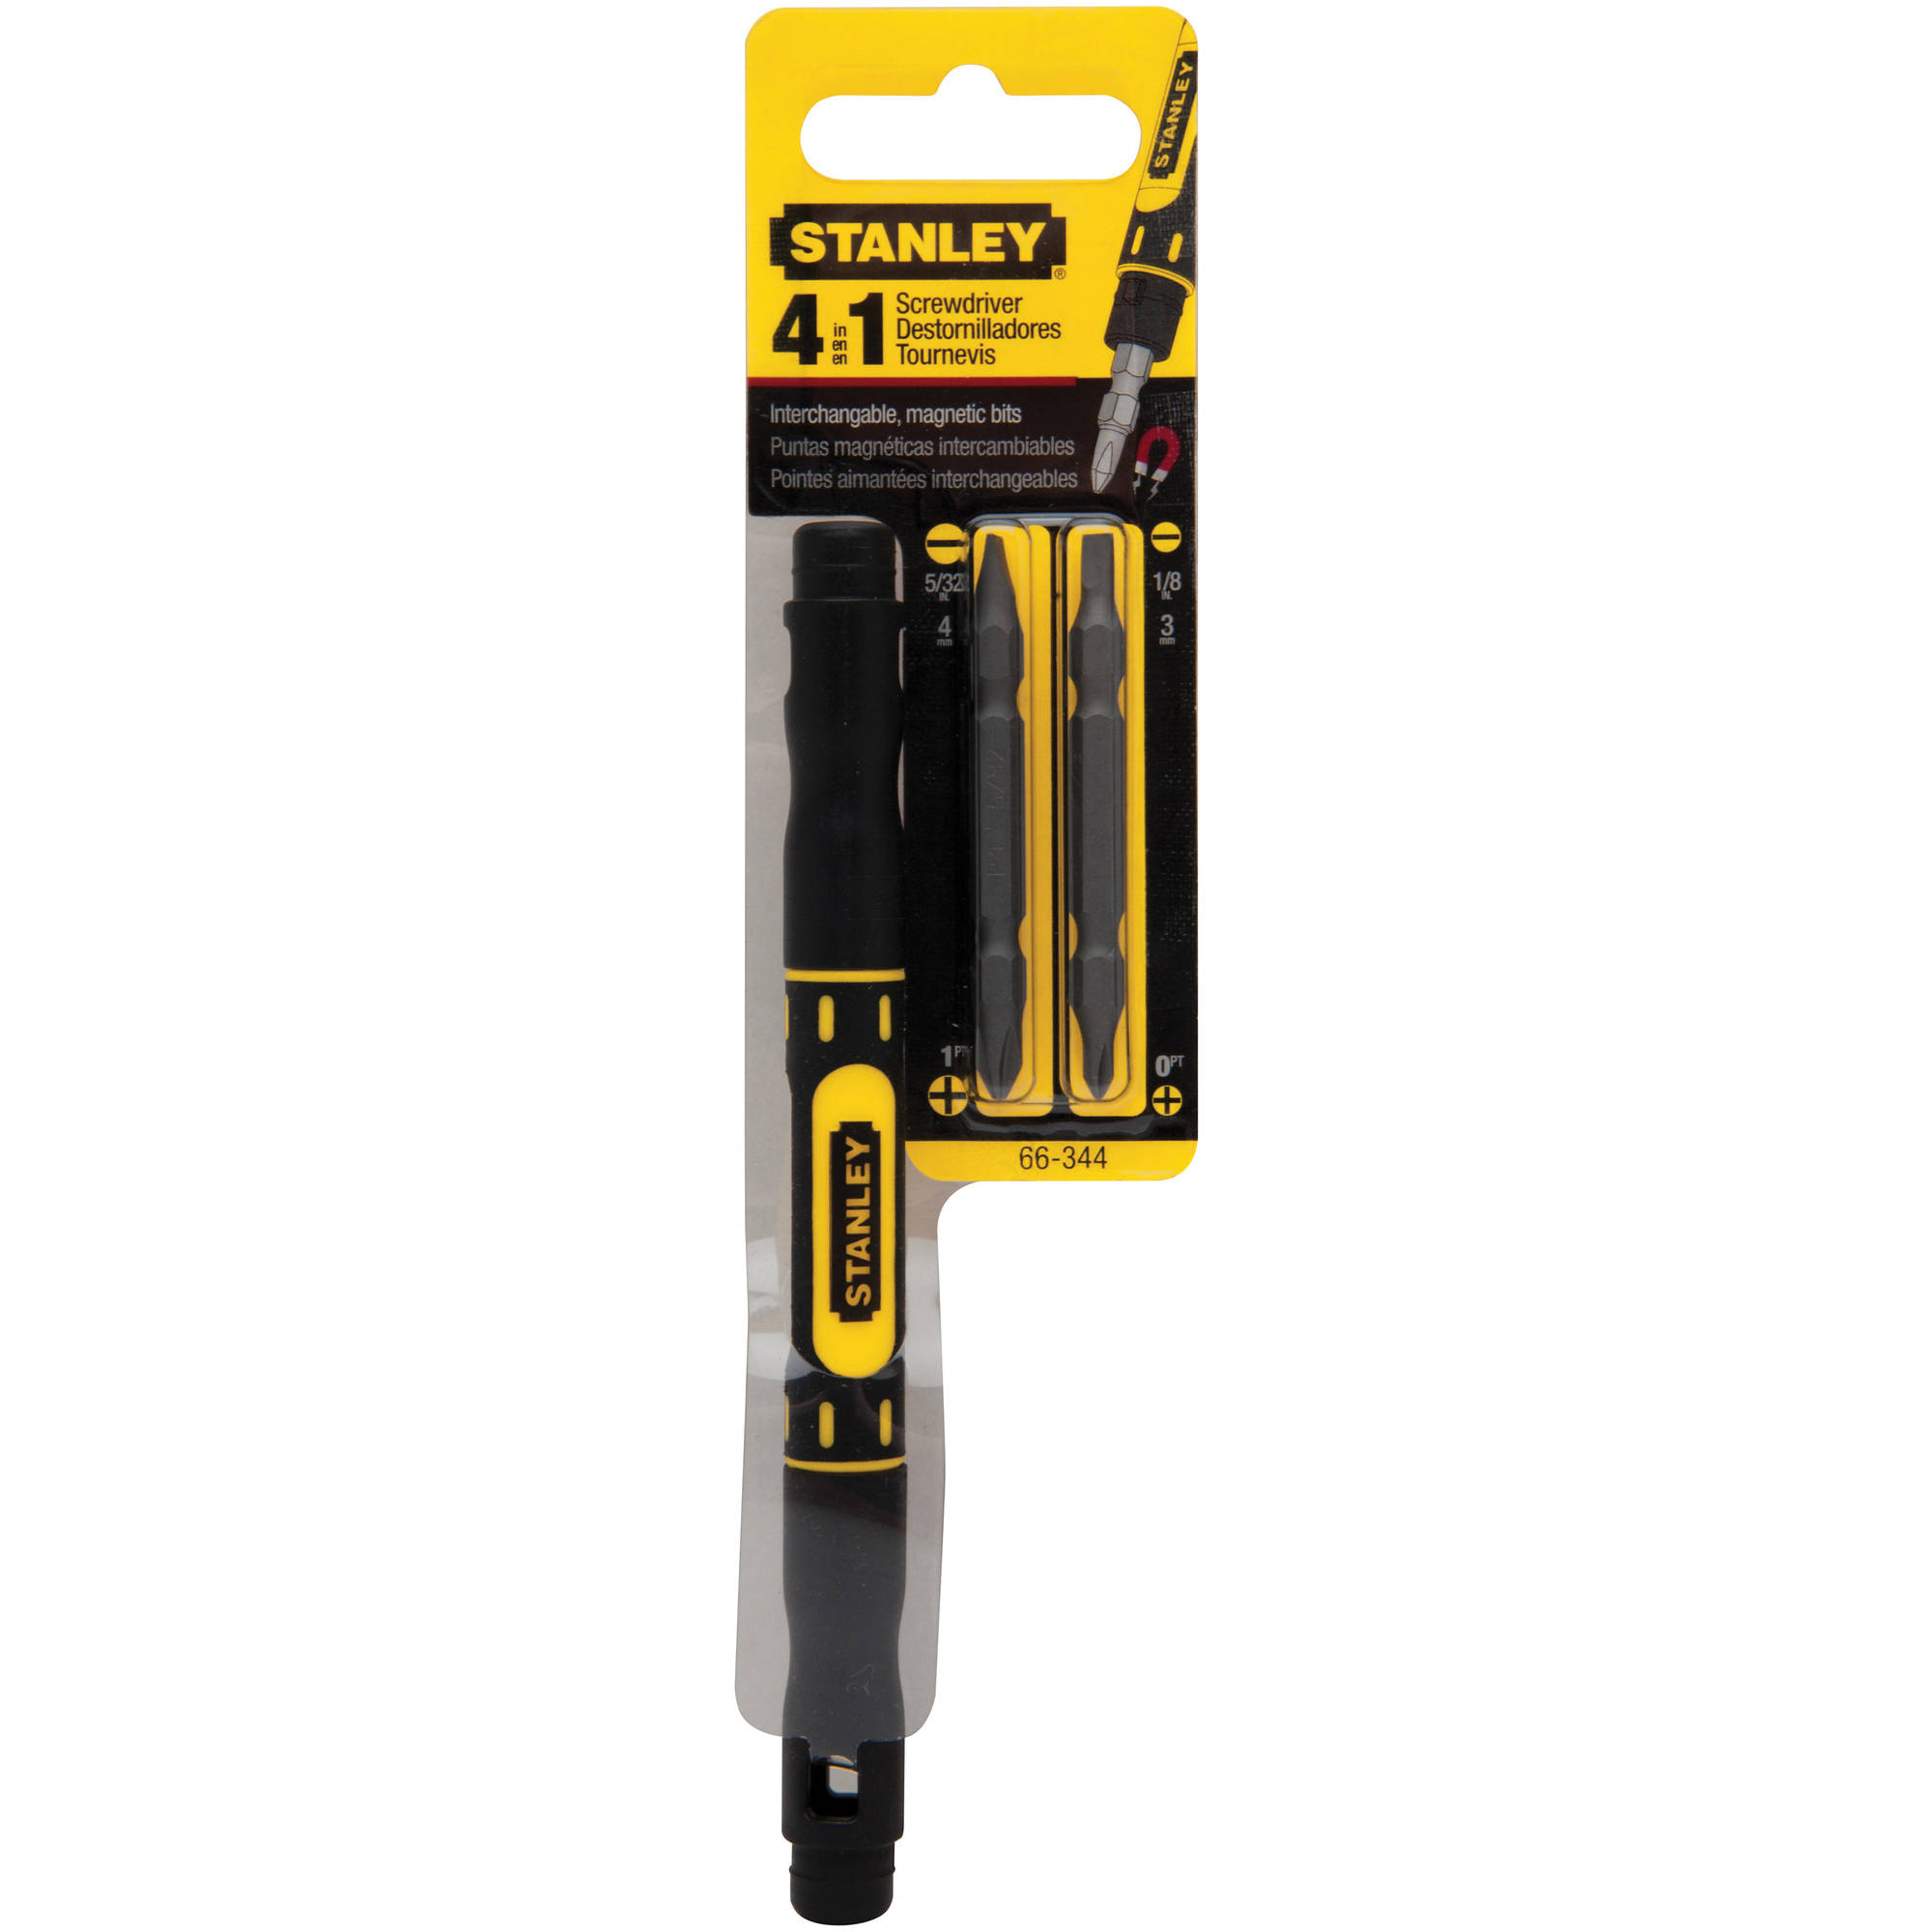 Stanley BOS66344 Four-In-One Pocket Screwdriver, Black - image 2 of 2